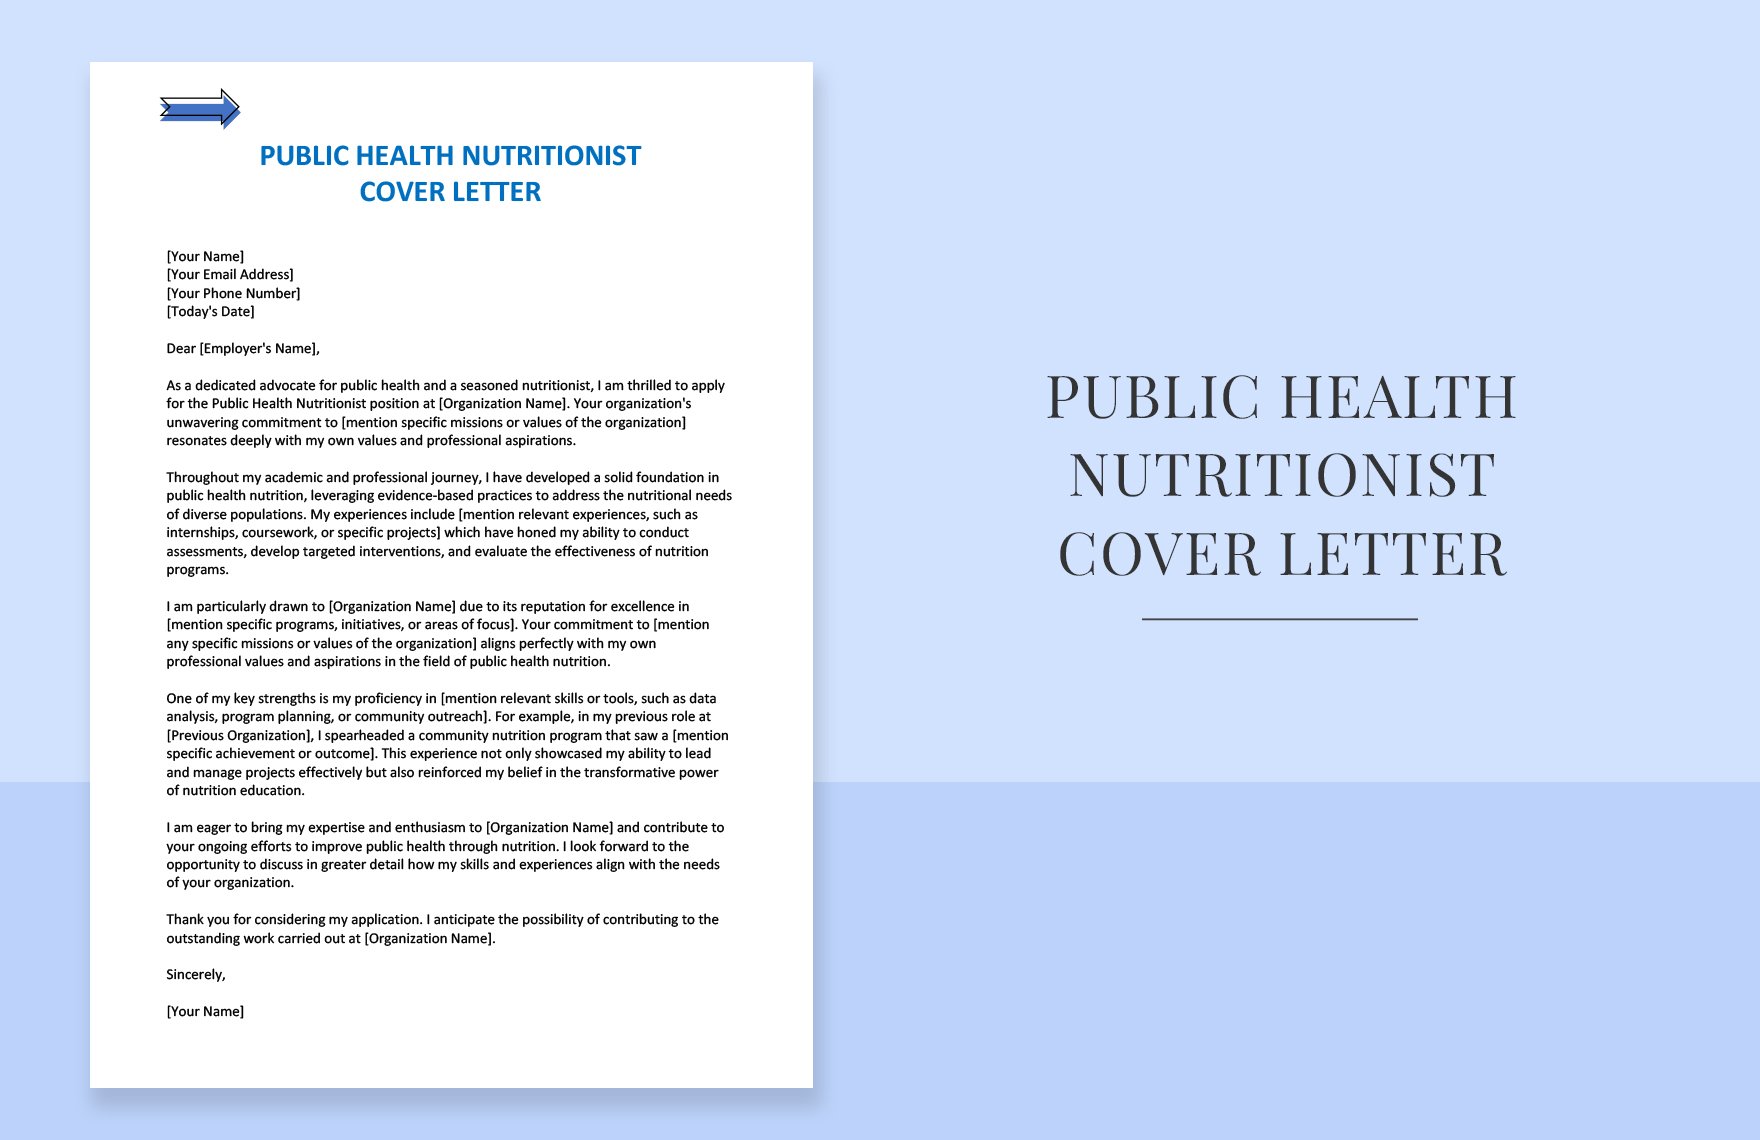 Public Health Nutritionist Cover Letter